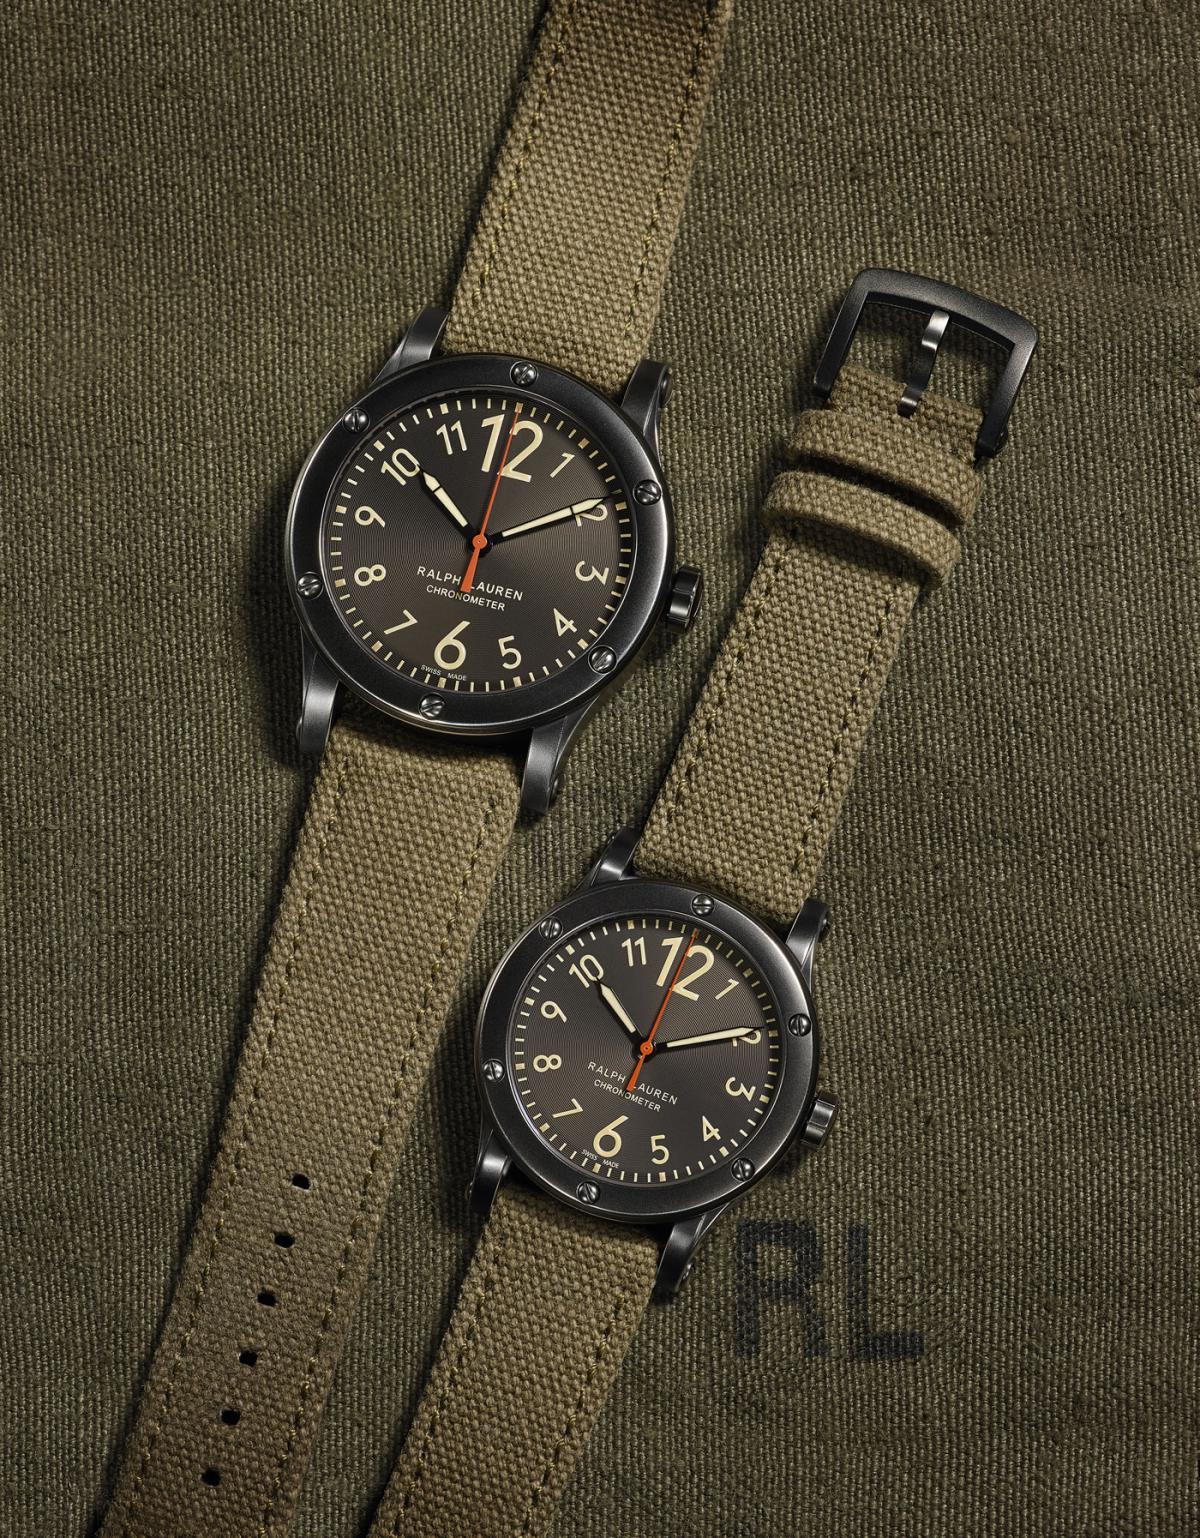 Ralph Lauren introduces two new watches in RL67 Safari Chronometer collection